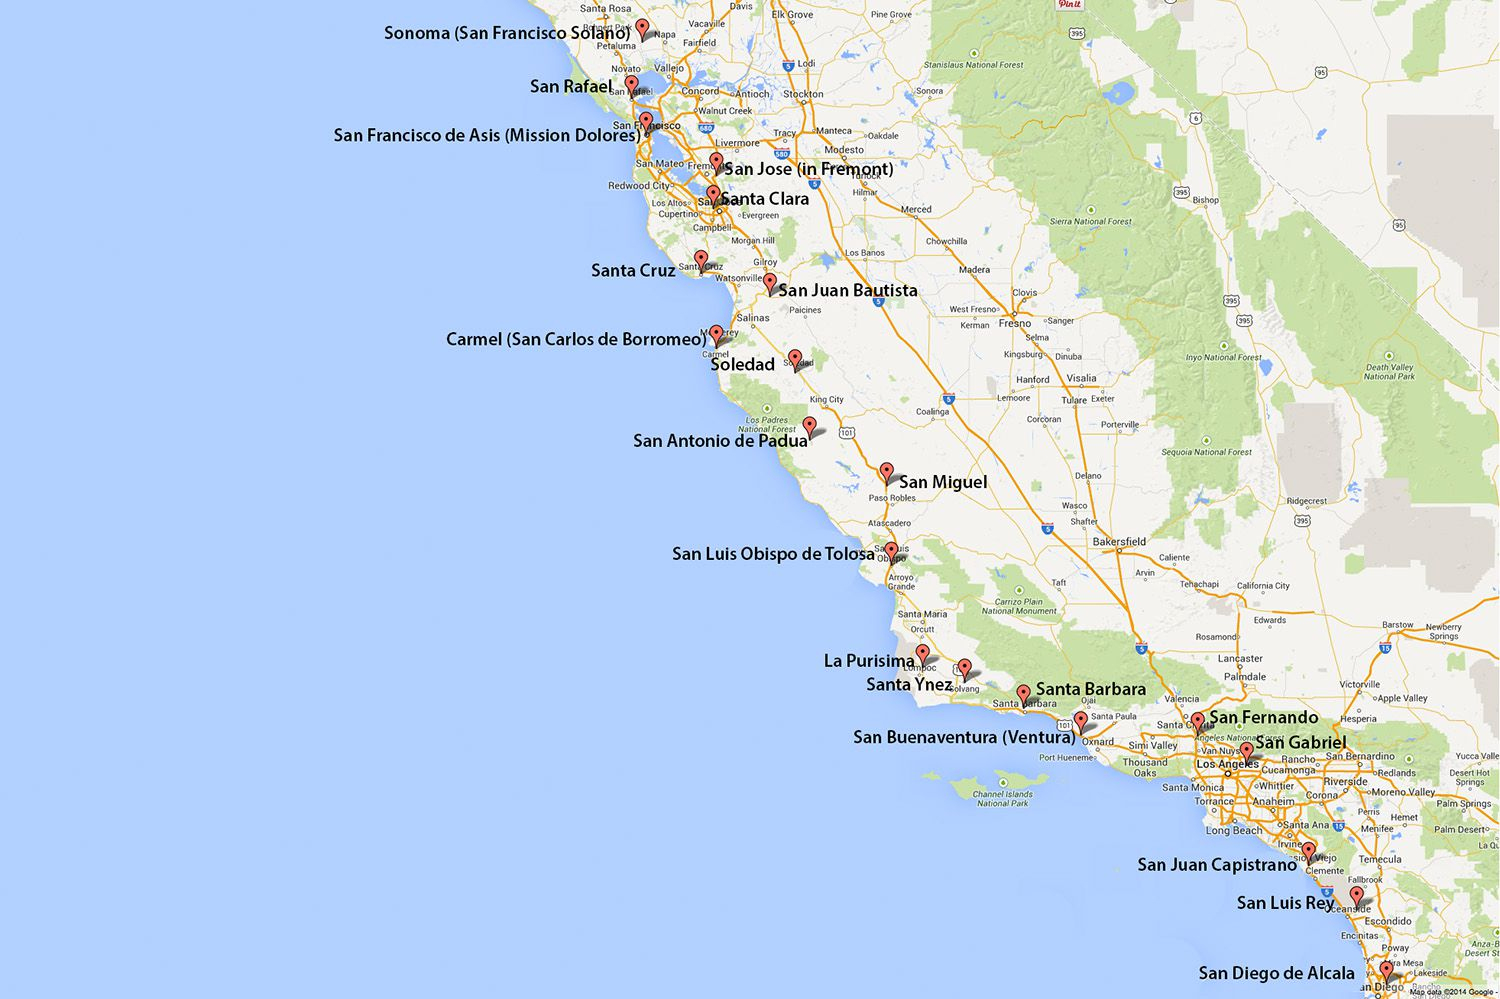 California Missions Map: Where To Find Them - Southern California Missions Map